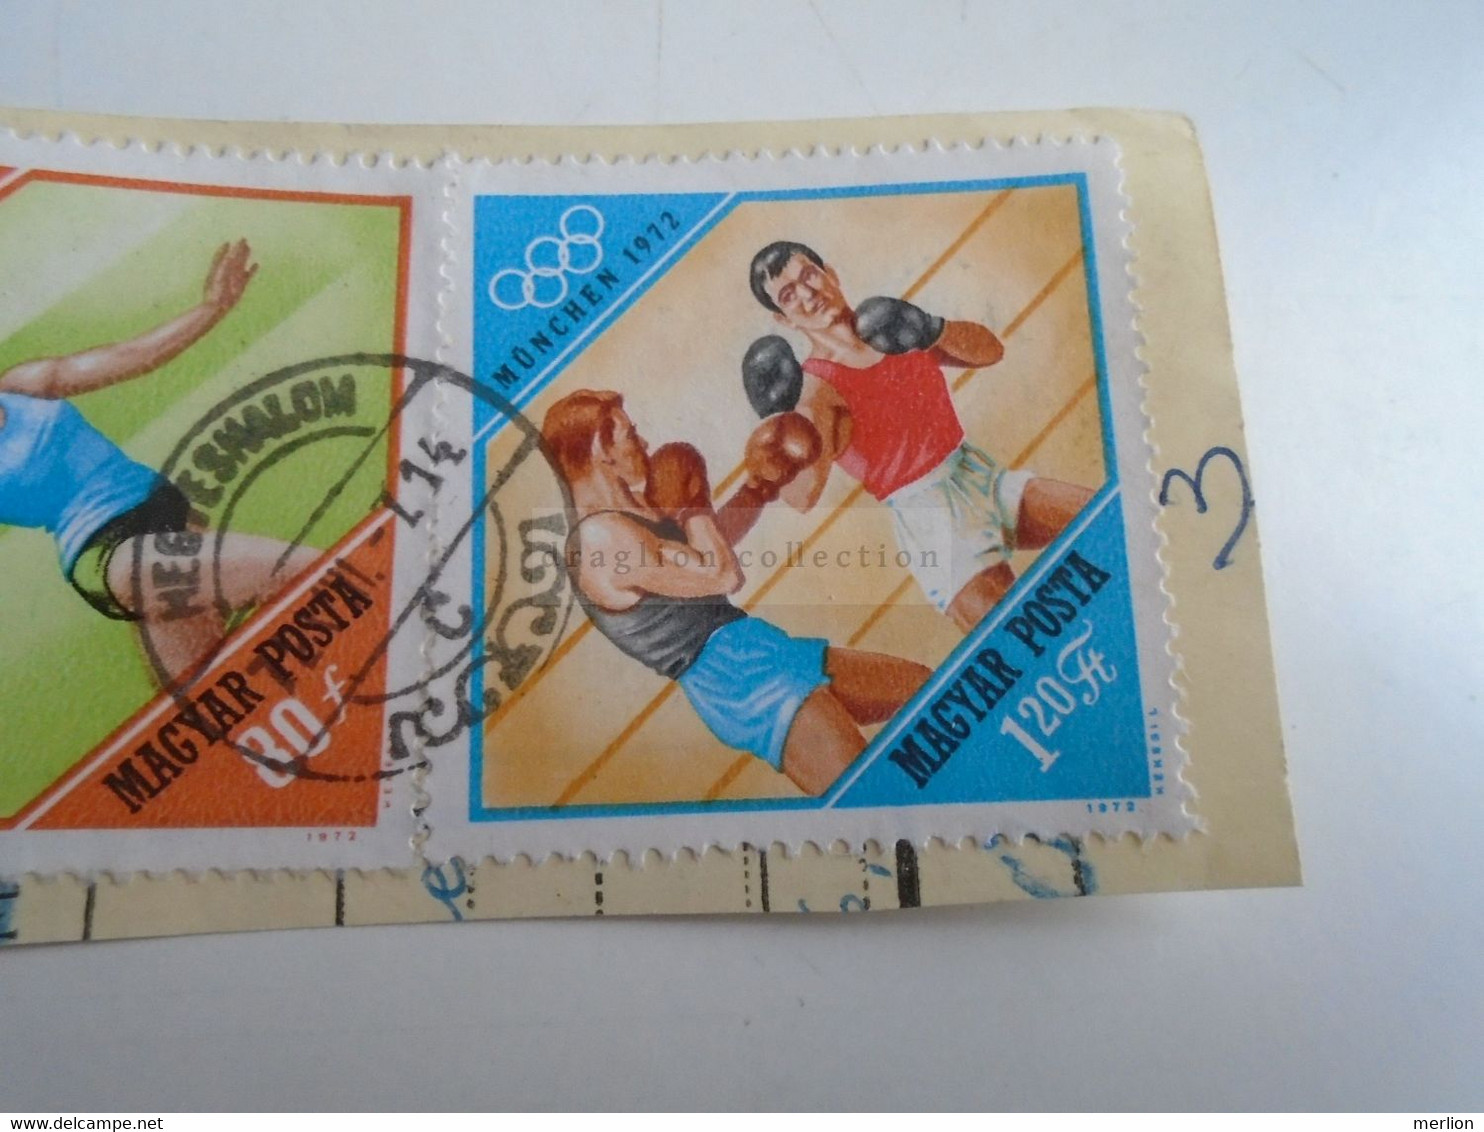 D187486   Parcel Card  (cut) Hungary 1972 Hegyeshalom  - Stamp München Olympic Games - Box Boxing - Postpaketten